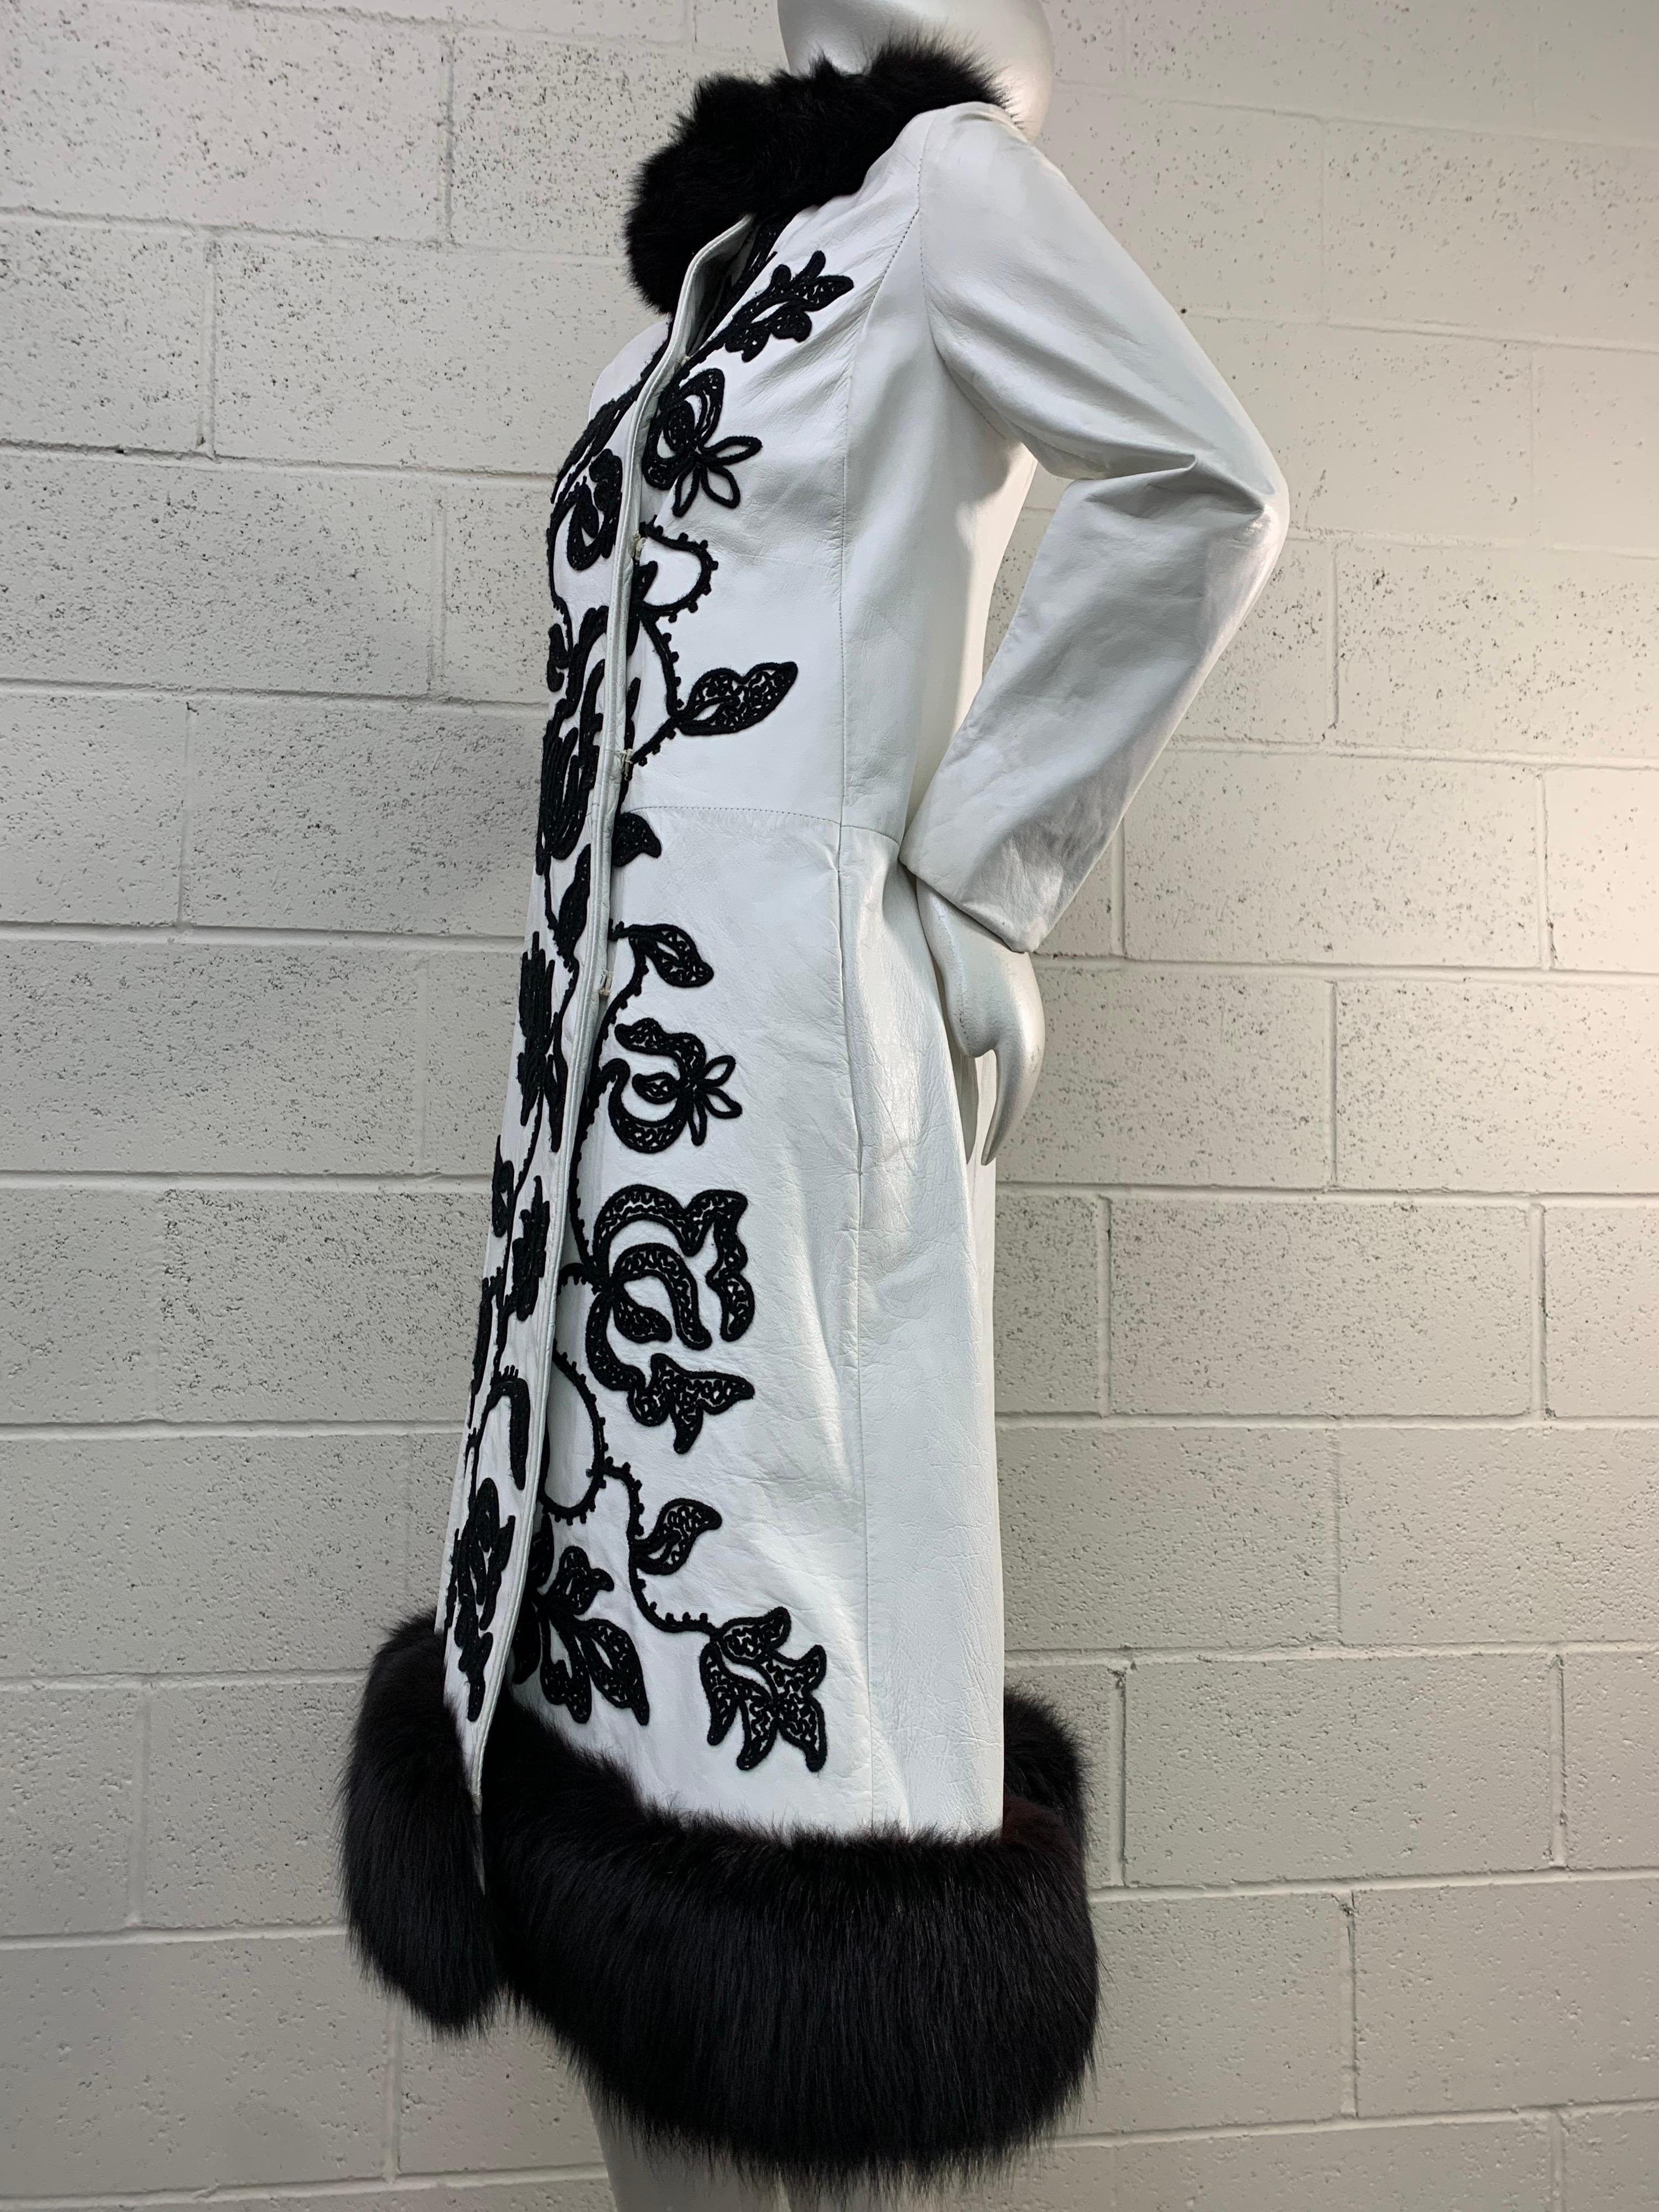 1960s White Leather Princess Coat w/ Black Crewel Embroidery and Fox Trim 2